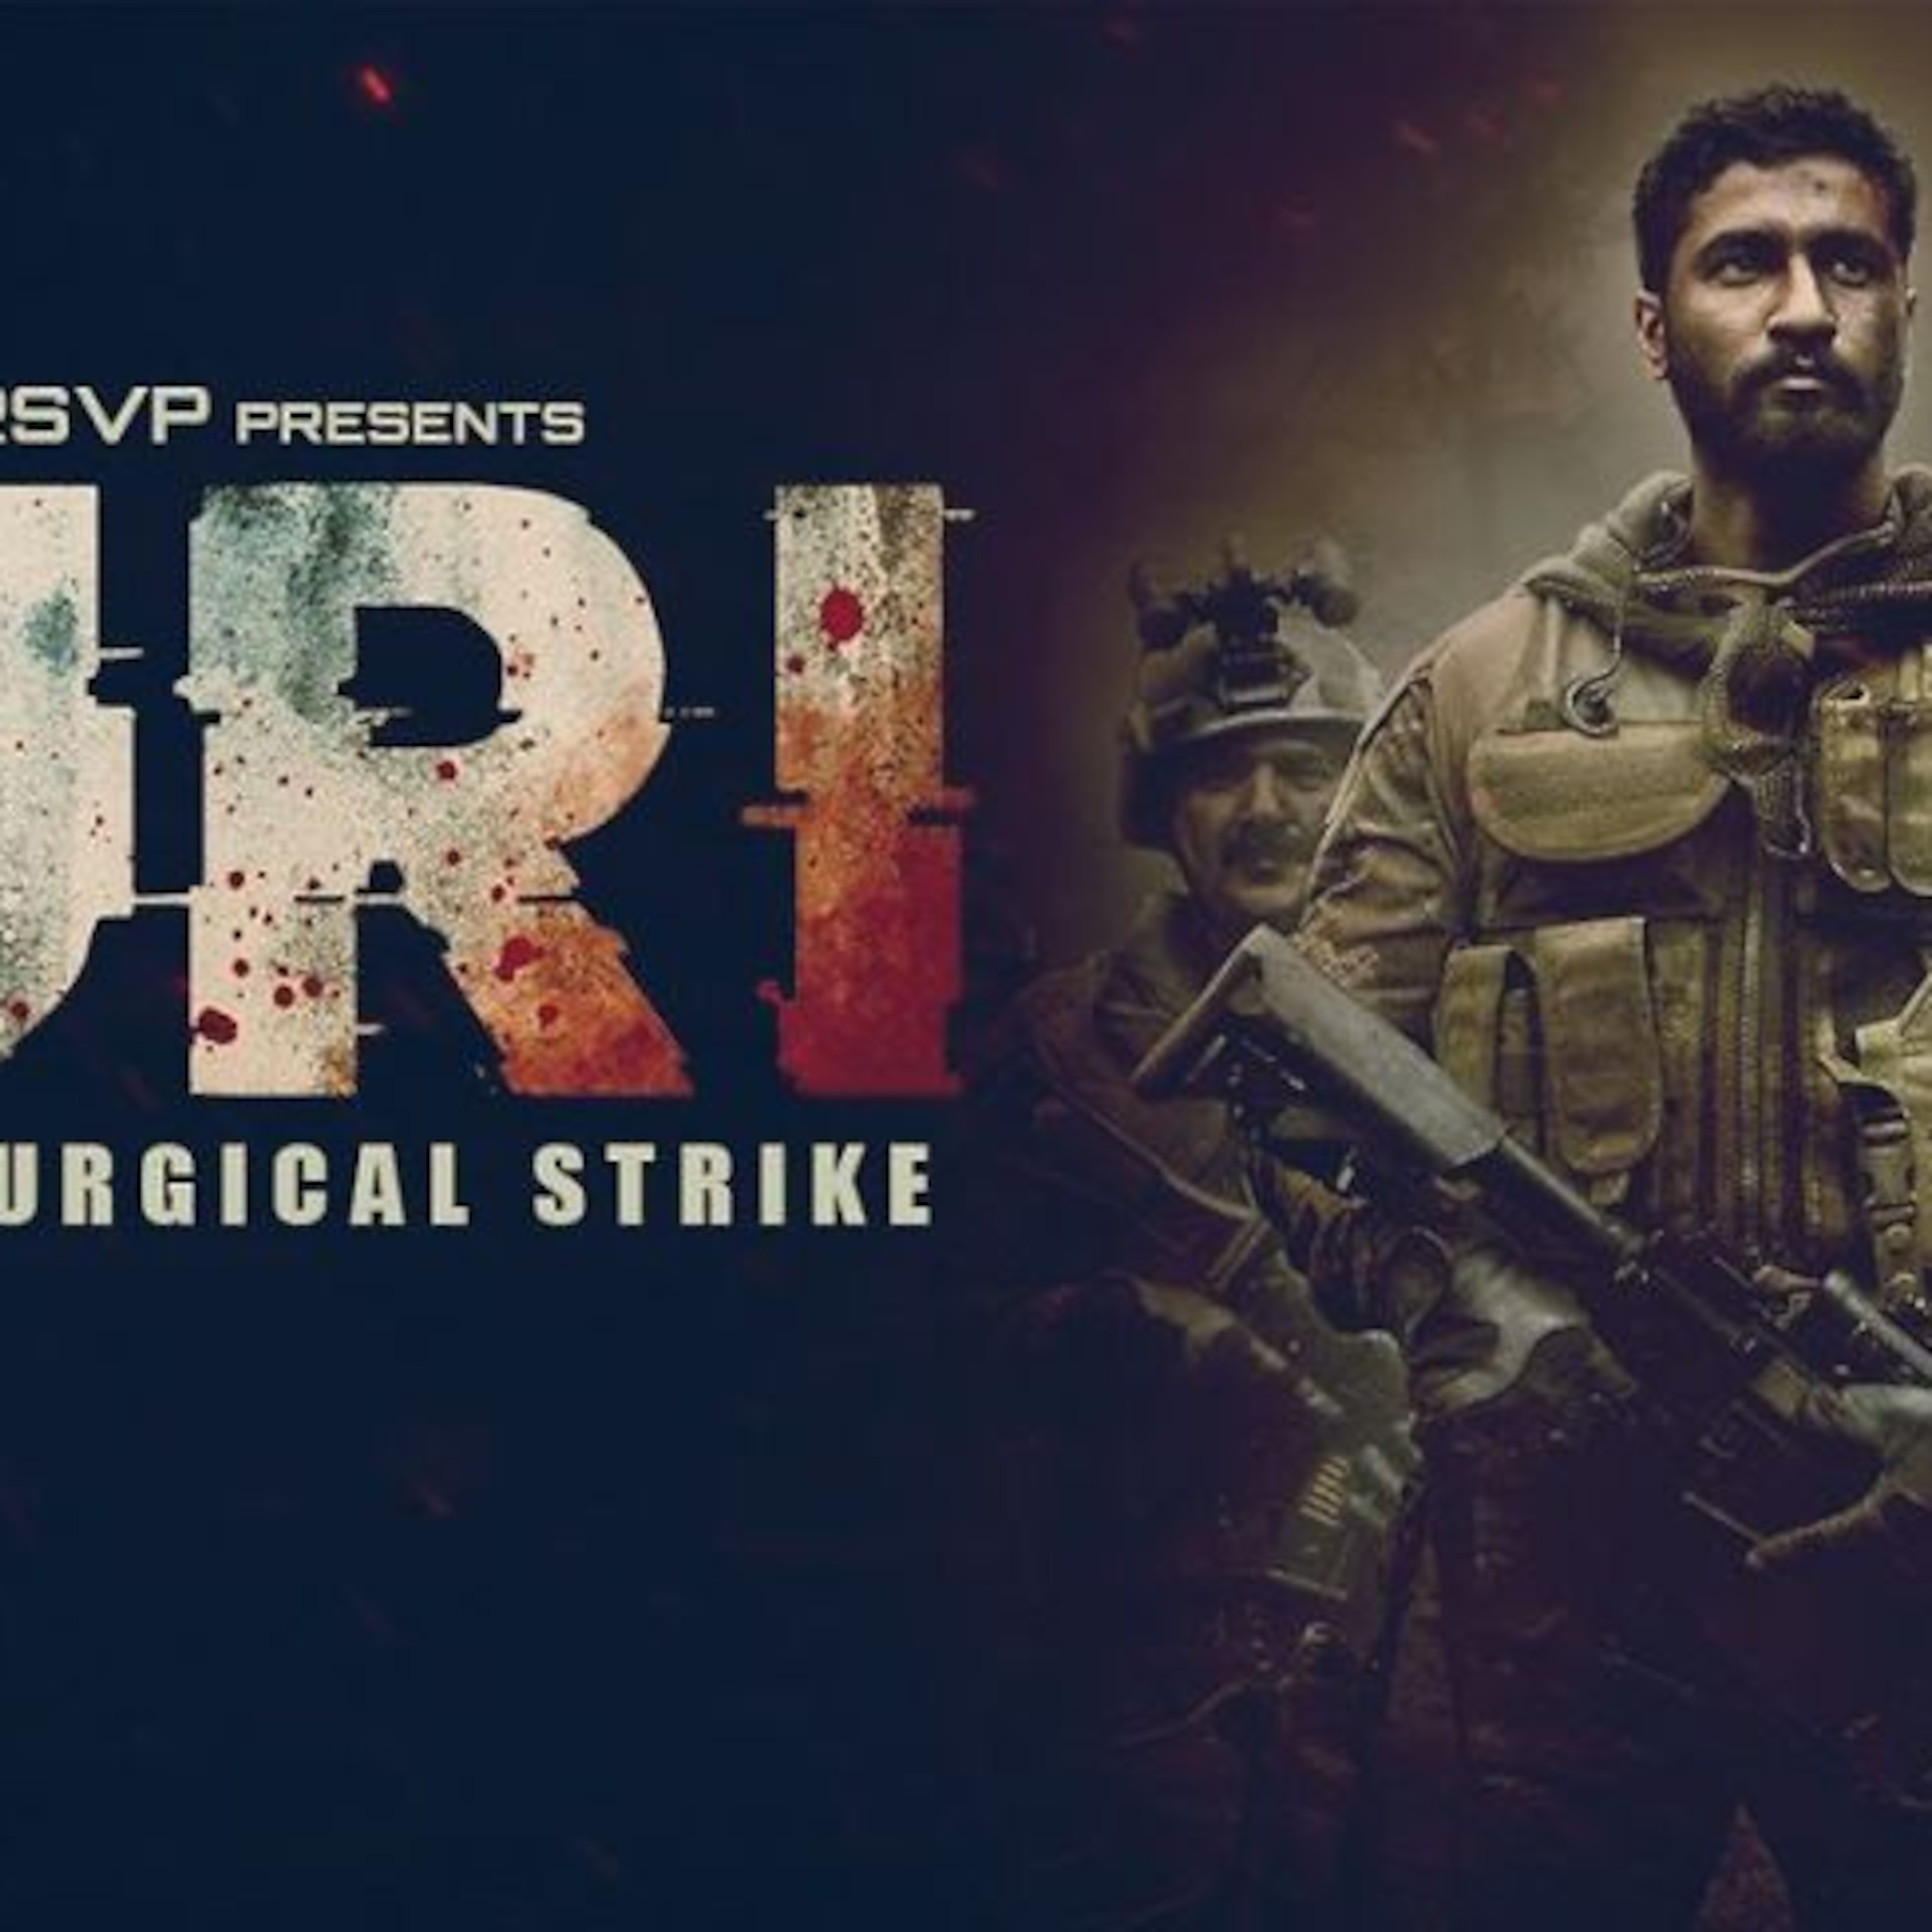 Download Uri Surgical Strike 2019 Movies Counter Openload Movie